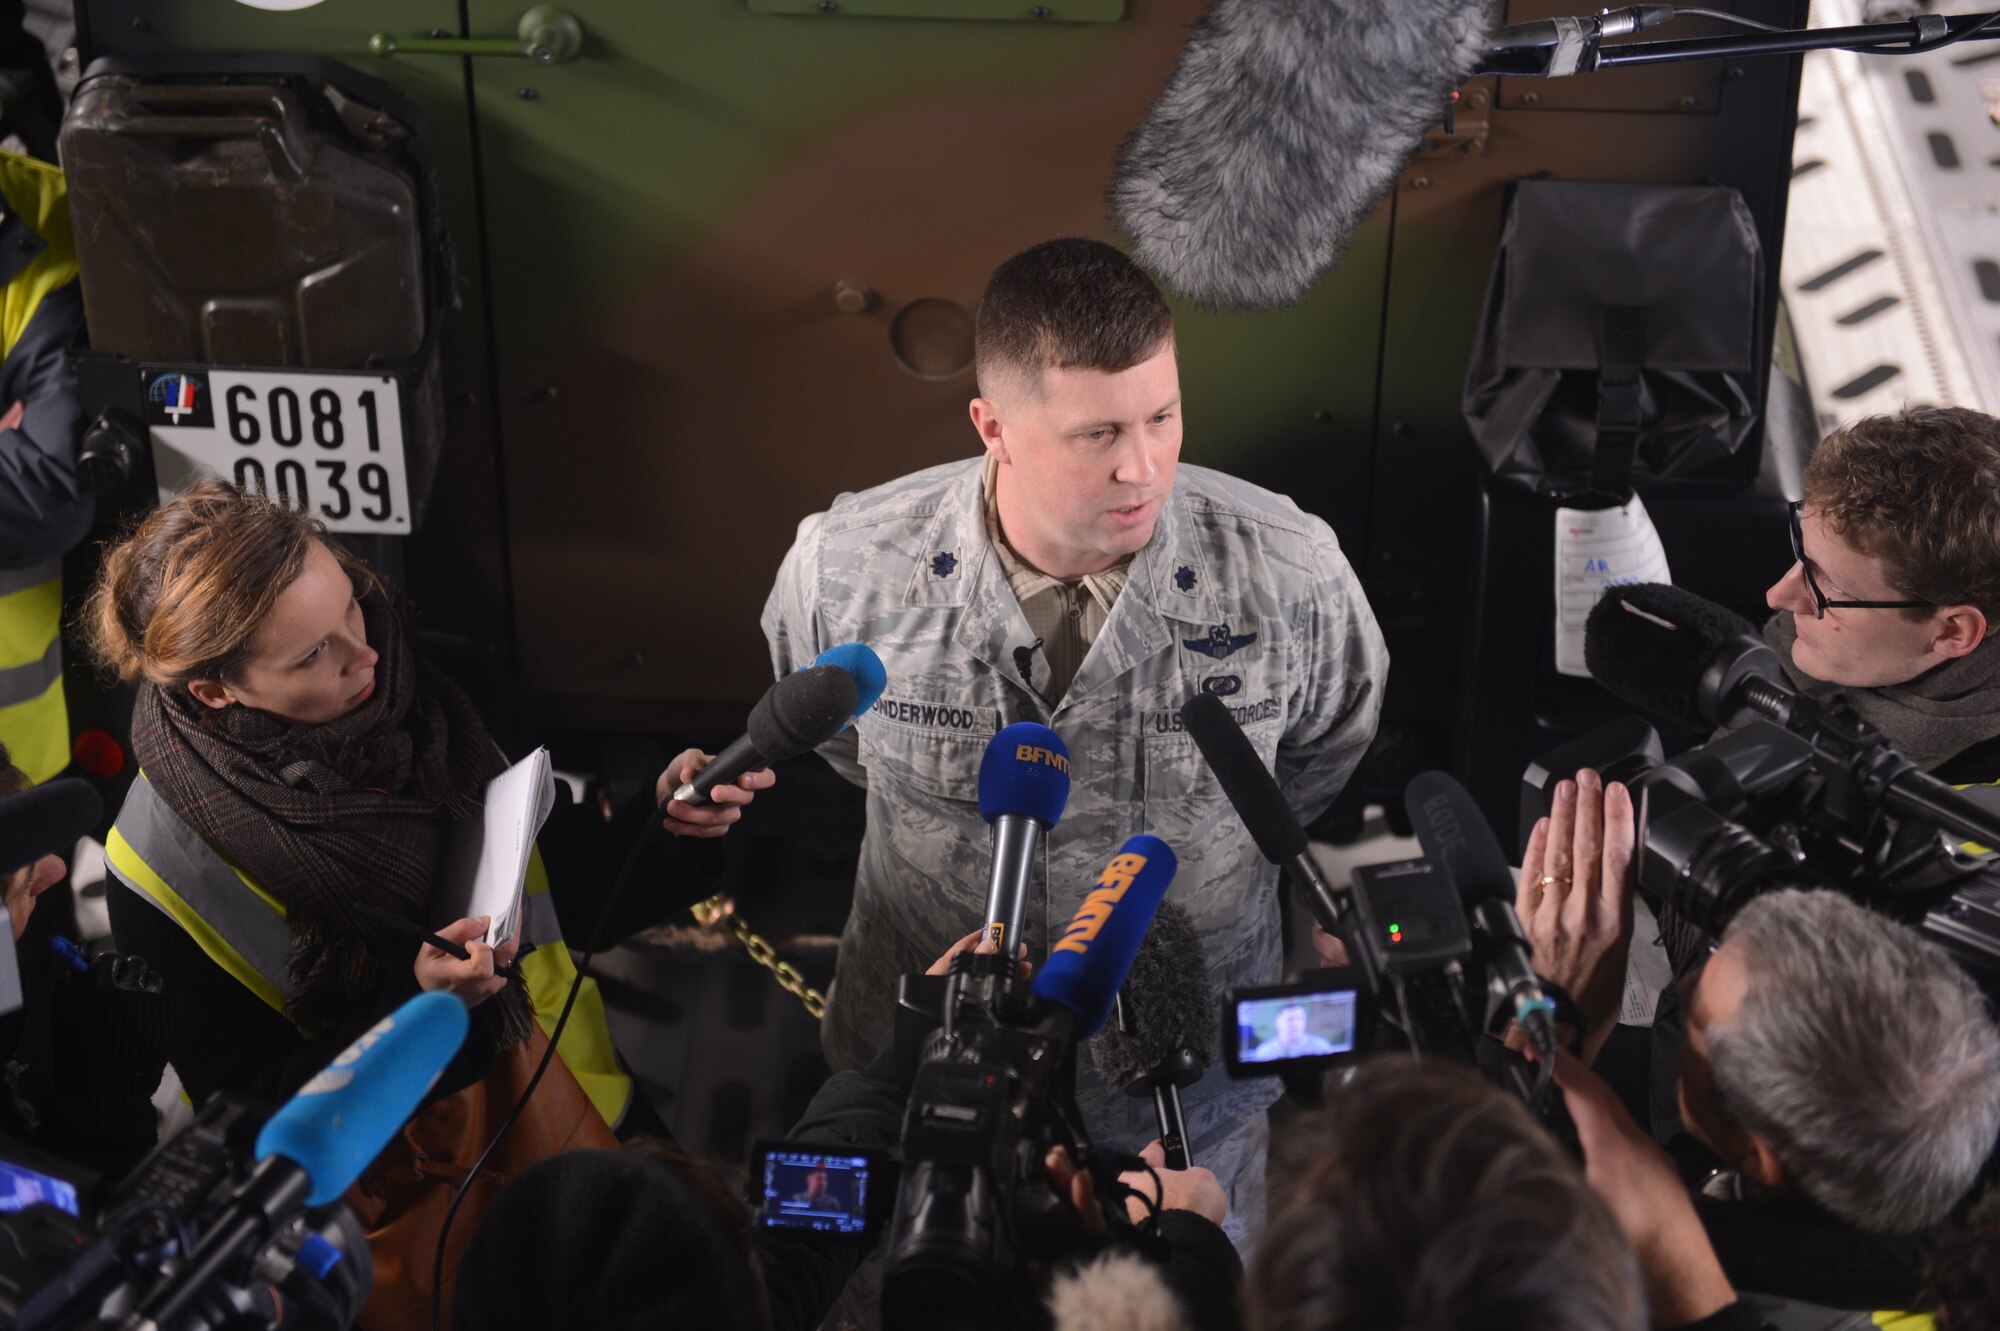 ISTRES, France - U.S Lt. Col. Shawn Underwood speaks to press about the U.S. mission in Istres, France, Jan. 24, 2013.  The United States has agreed to help France airlift troops and equipment into Mali. (U.S. Air Force photo by Staff Sgt. Nathanael Callon) (Released)